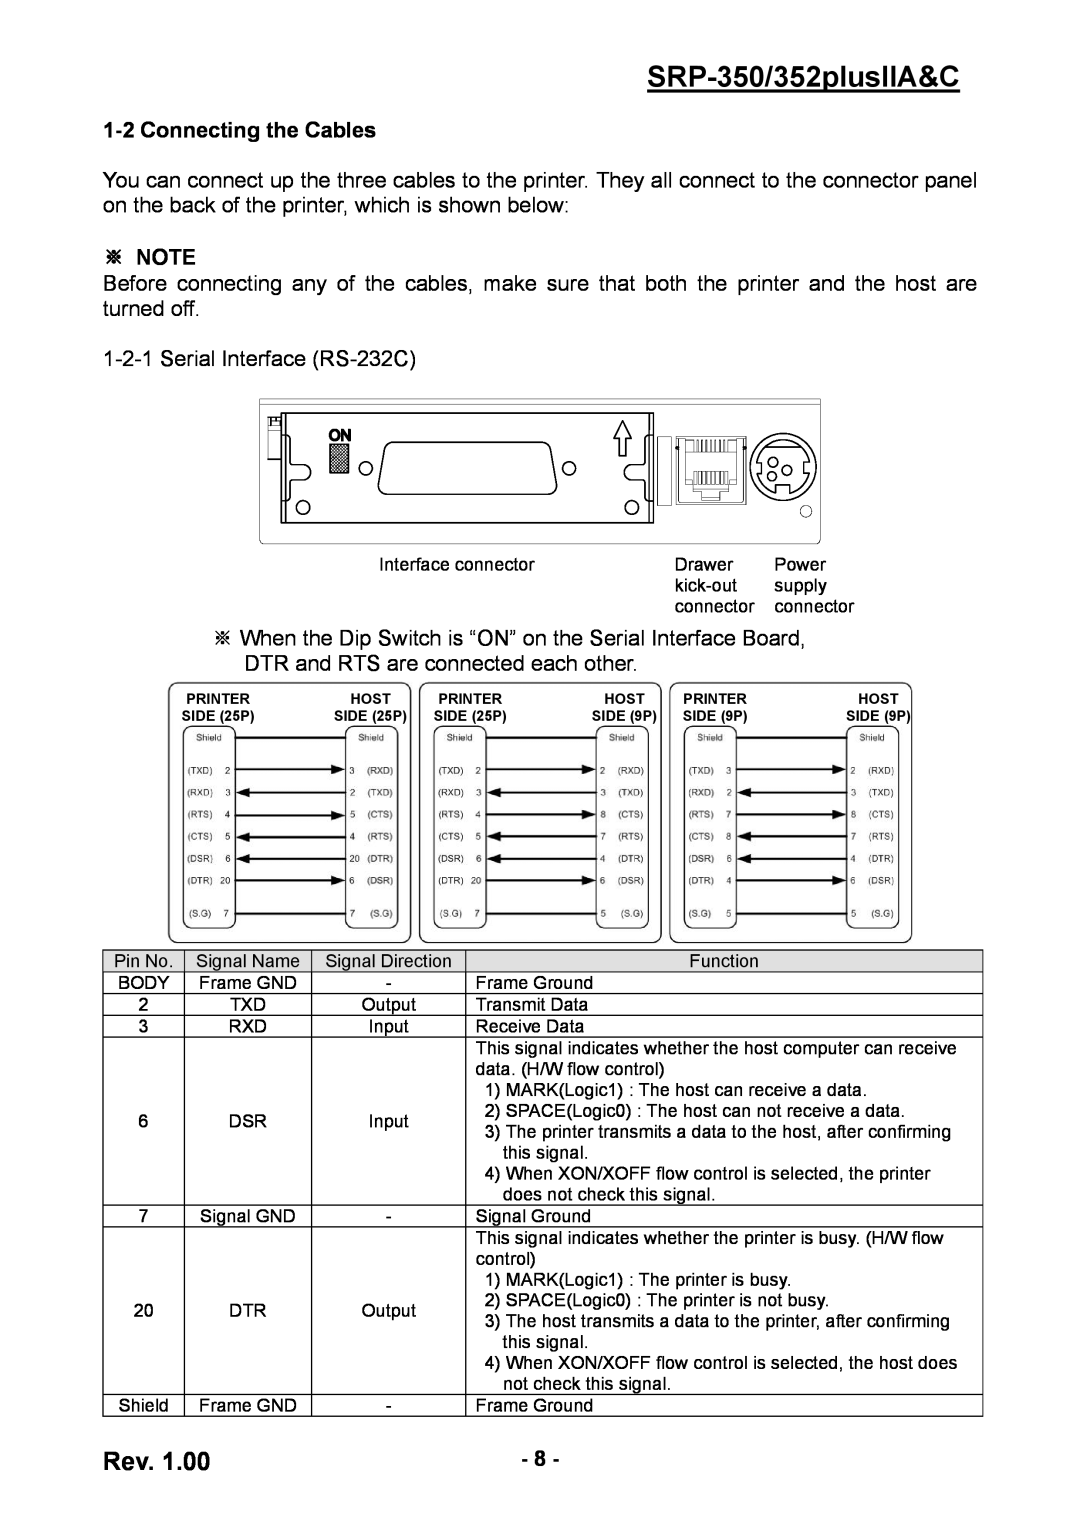 BIXOLON SRP-352 user manual Connecting the Cables, SRP-350/352plusIIA&C, ※ Note, Serial Interface RS-232C 